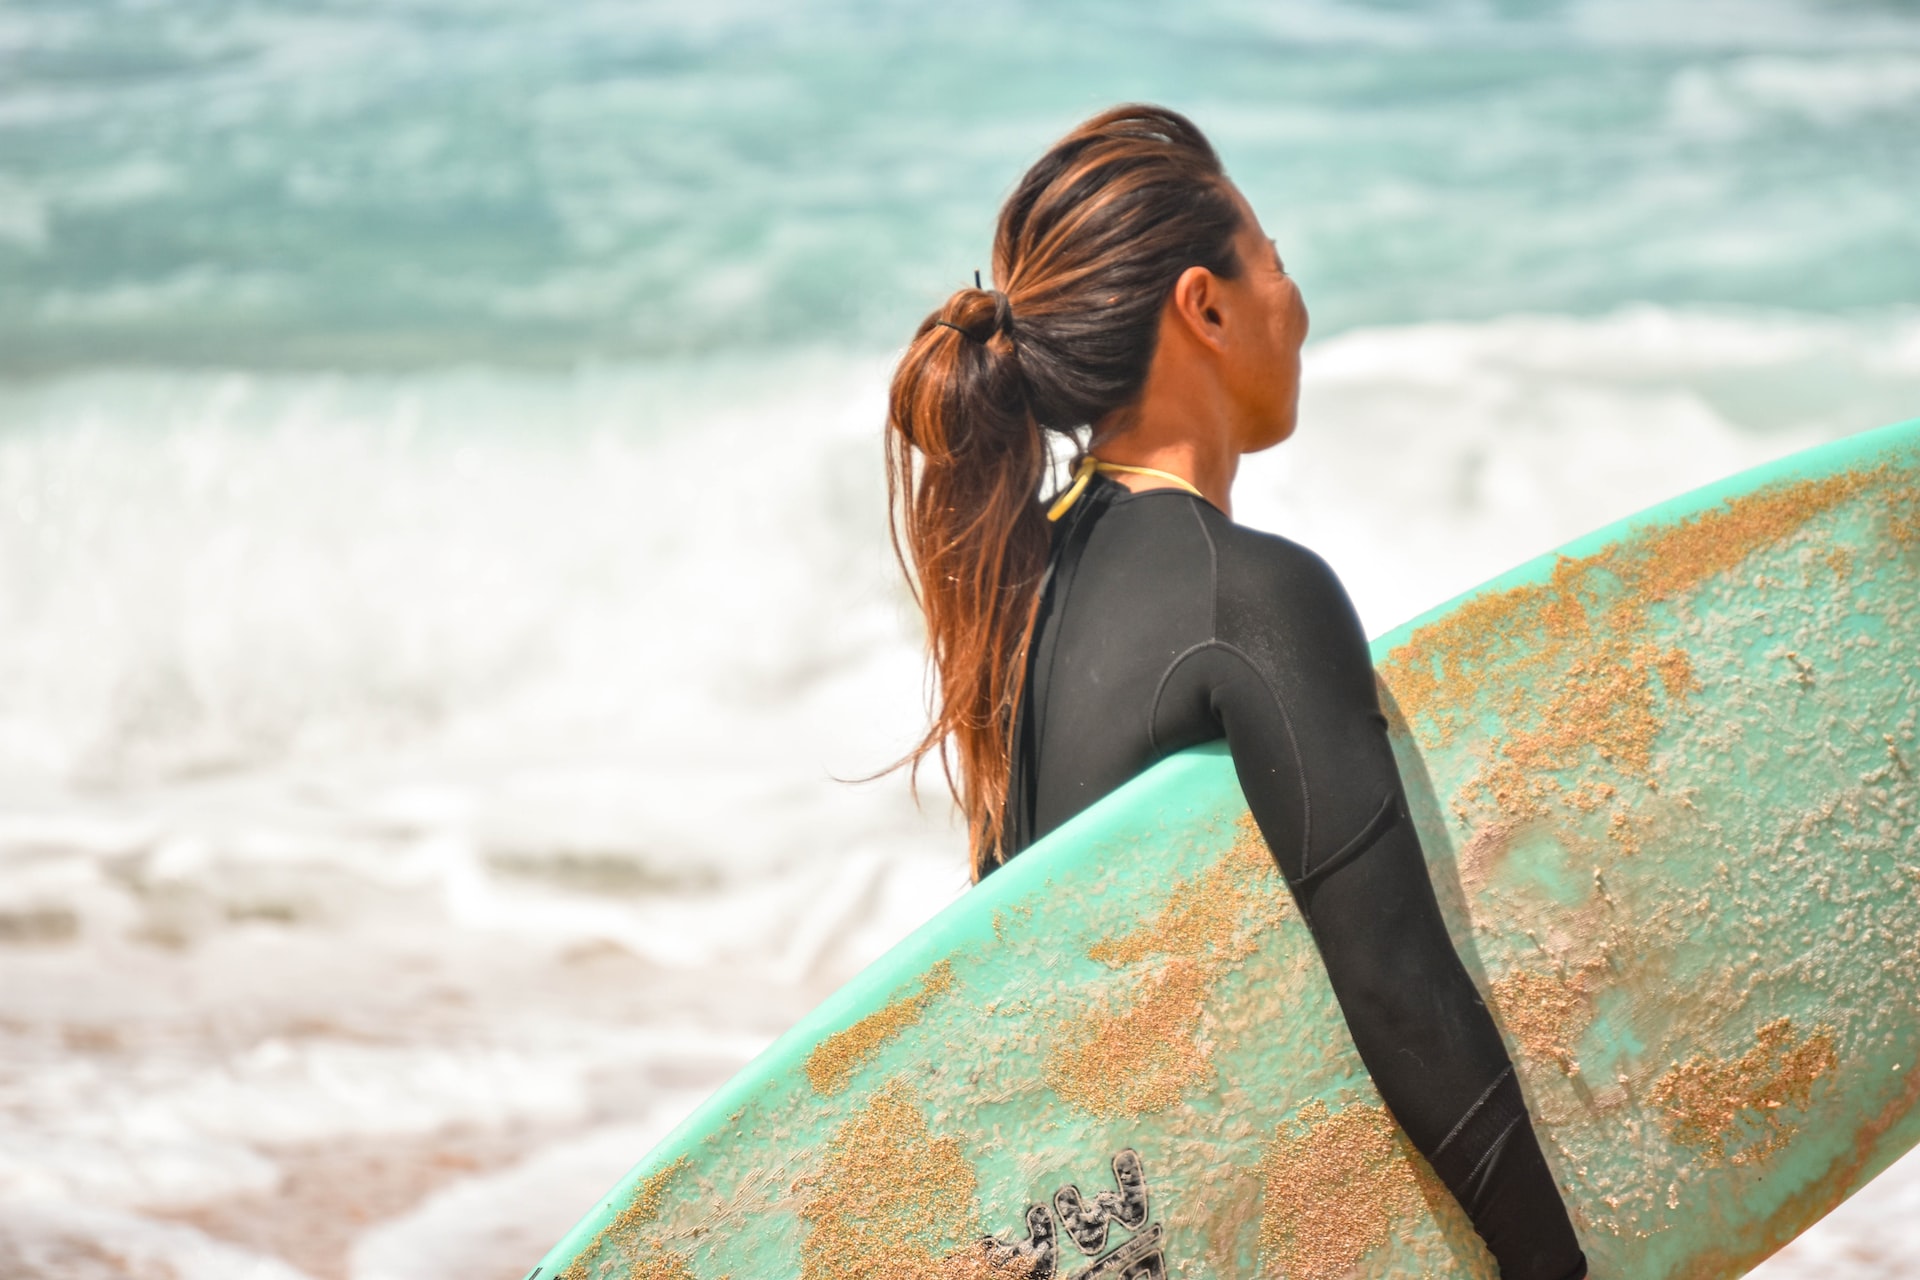 Why Do Surfers Always Wear Wetsuits?